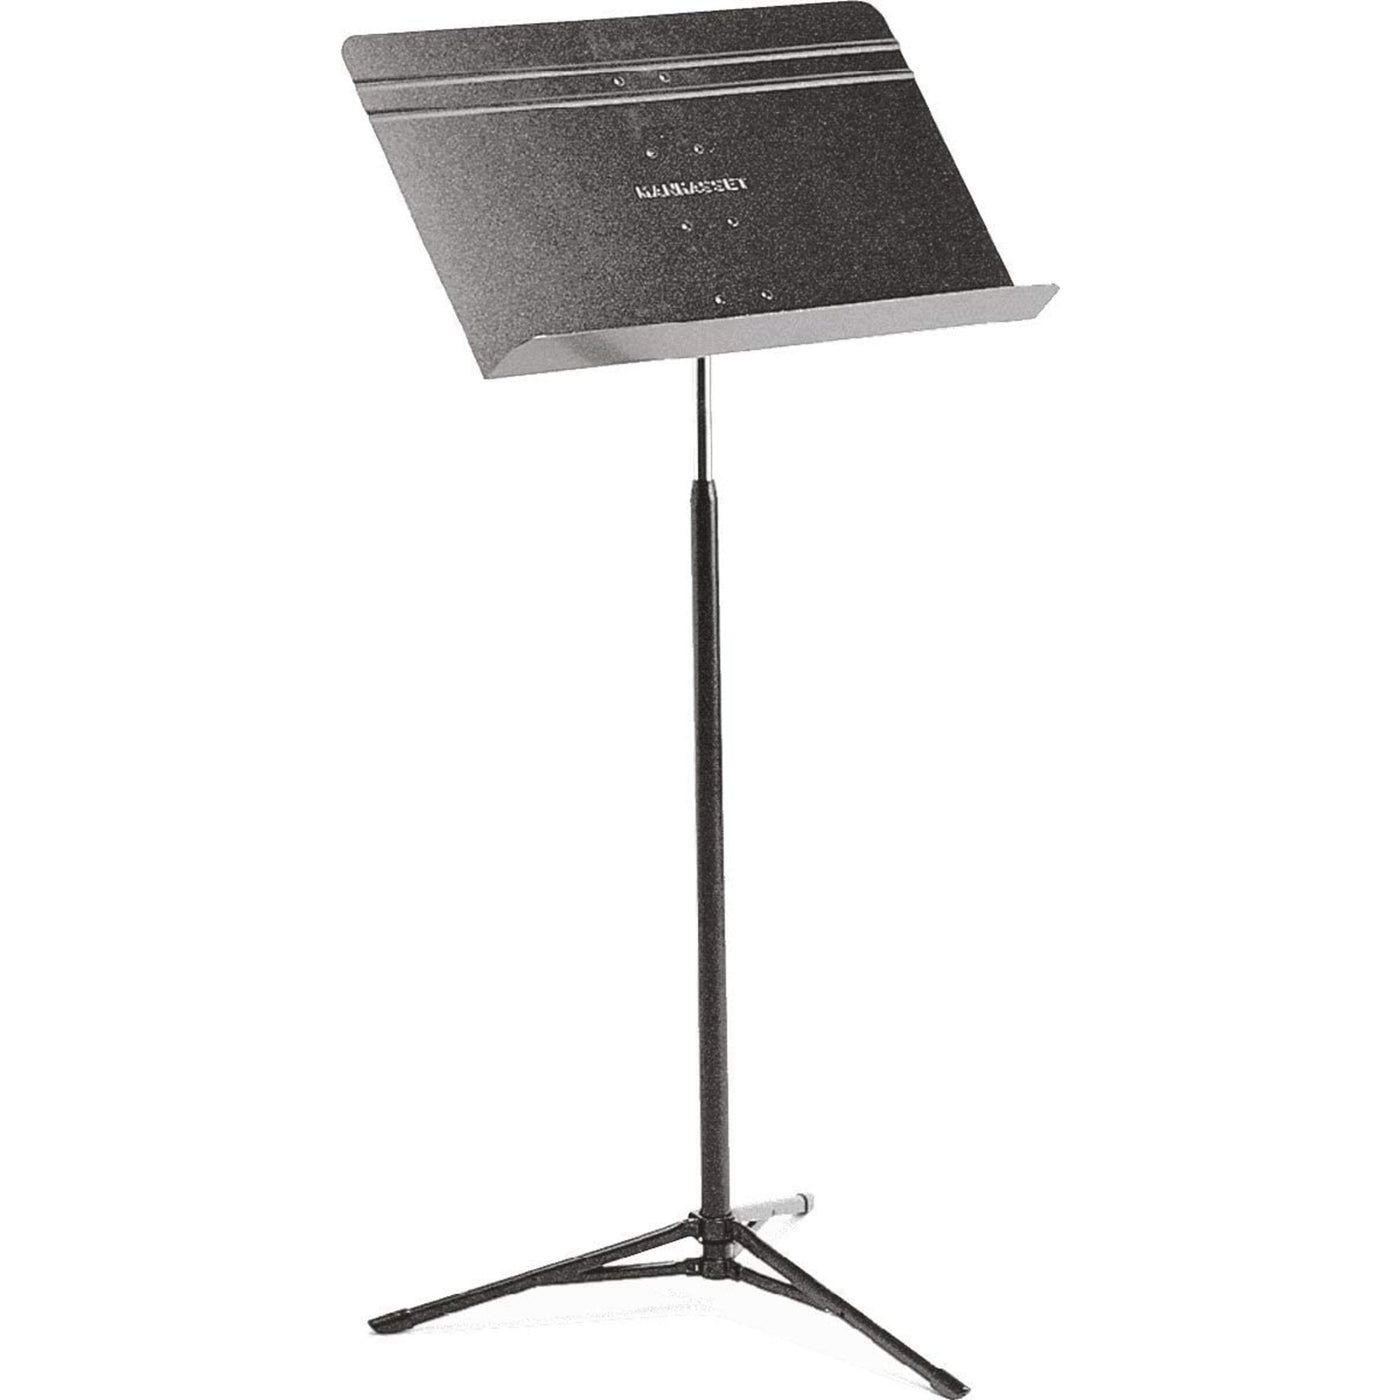 Manhasset Portable Voyager Concertino Music Stand, Box of 6 (52CM)